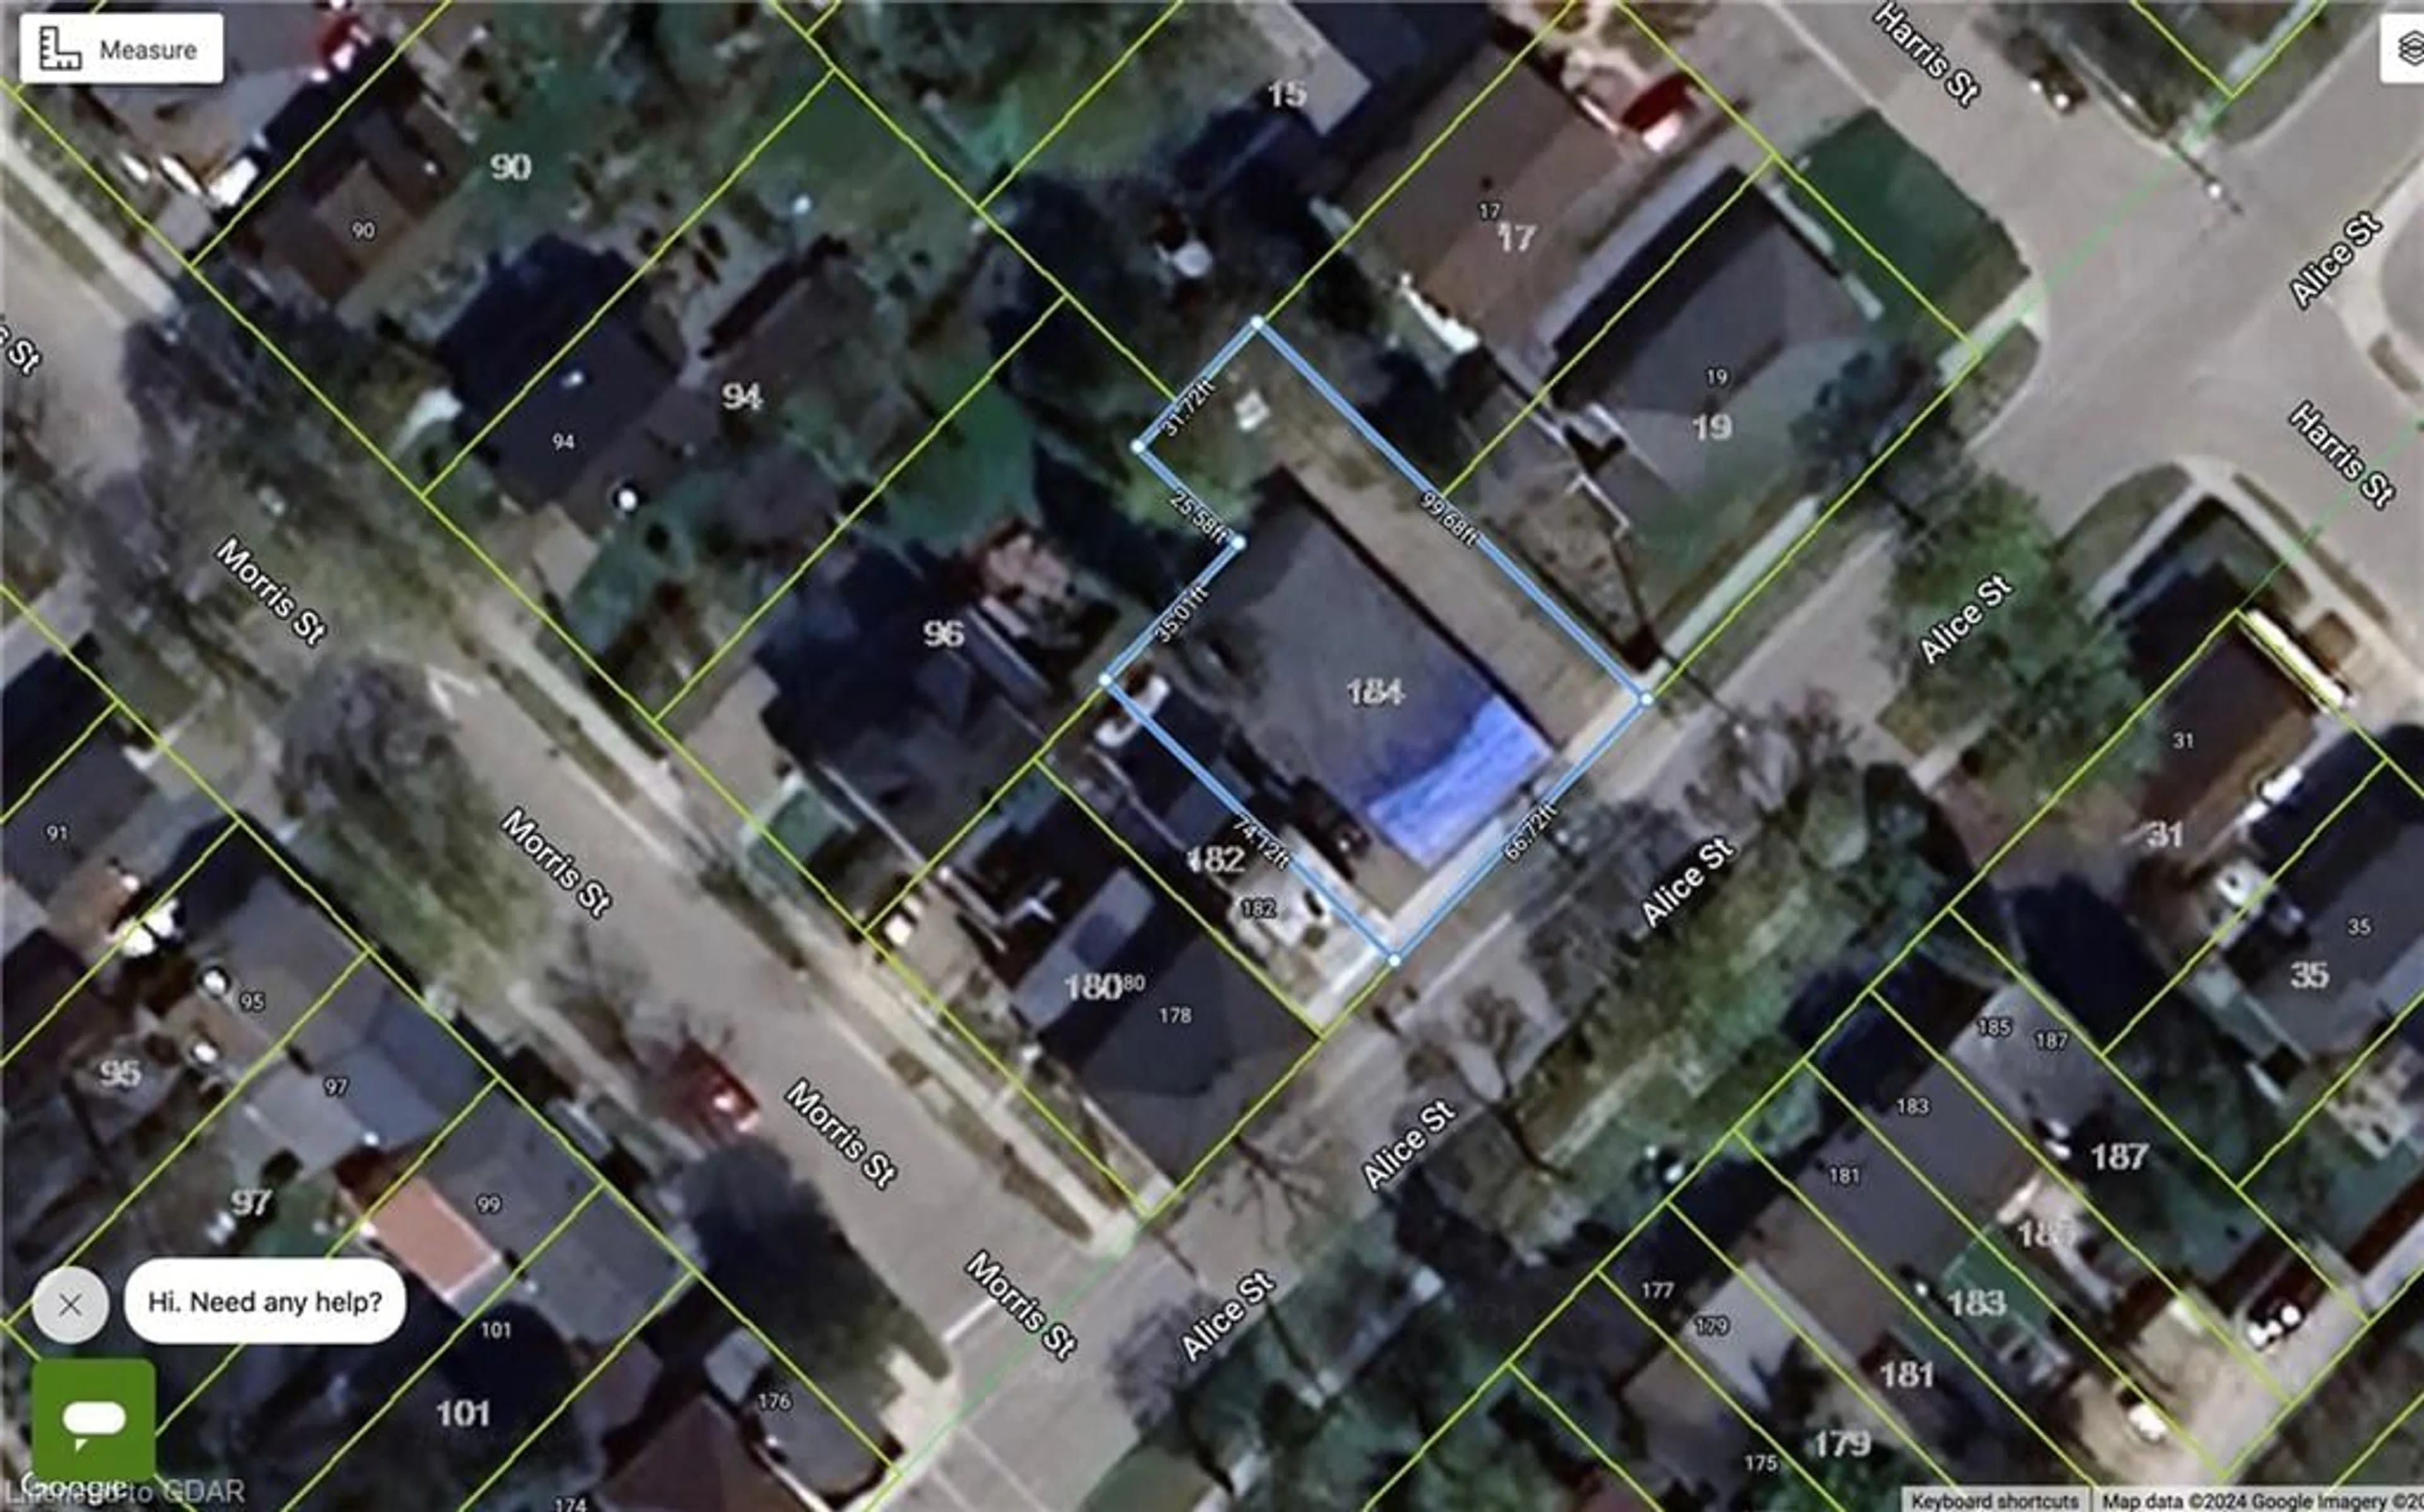 Street view for 184 Alice St, Guelph Ontario N1E 3A4